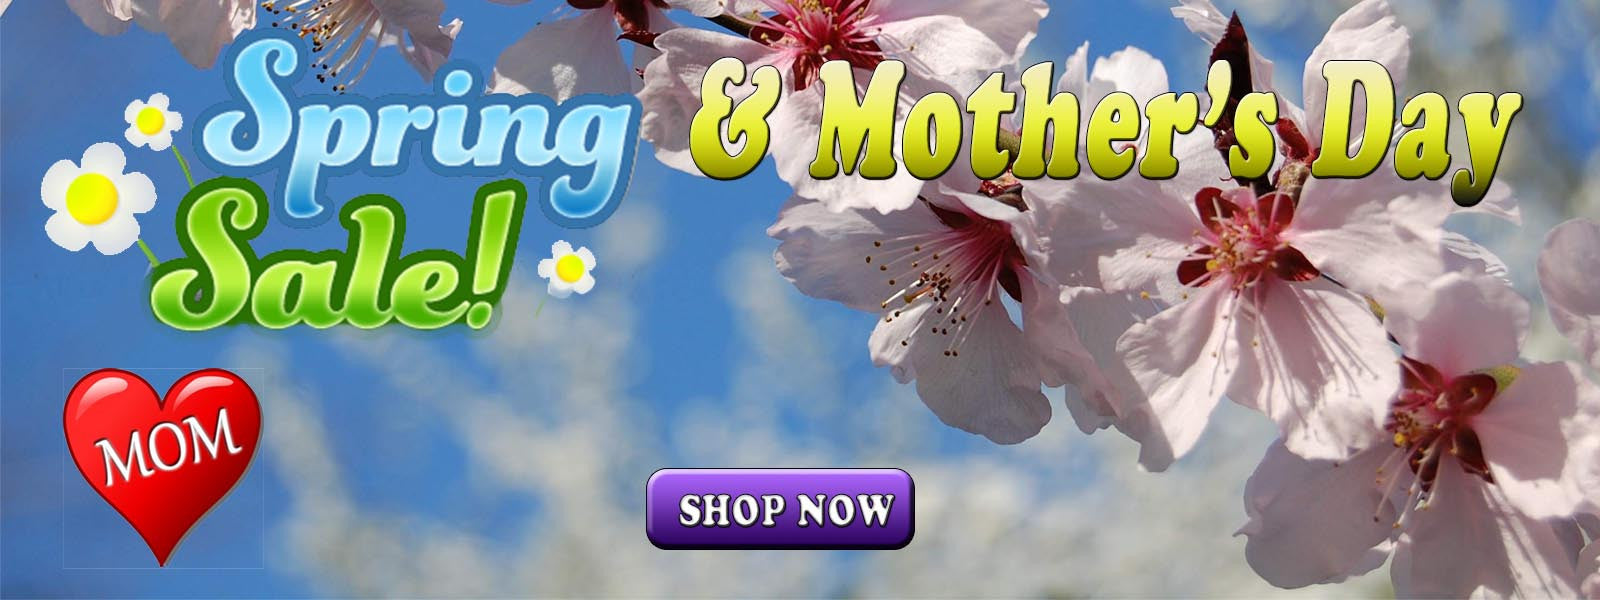 Happy Mother's Day Sale - Heaven of Sound 2020